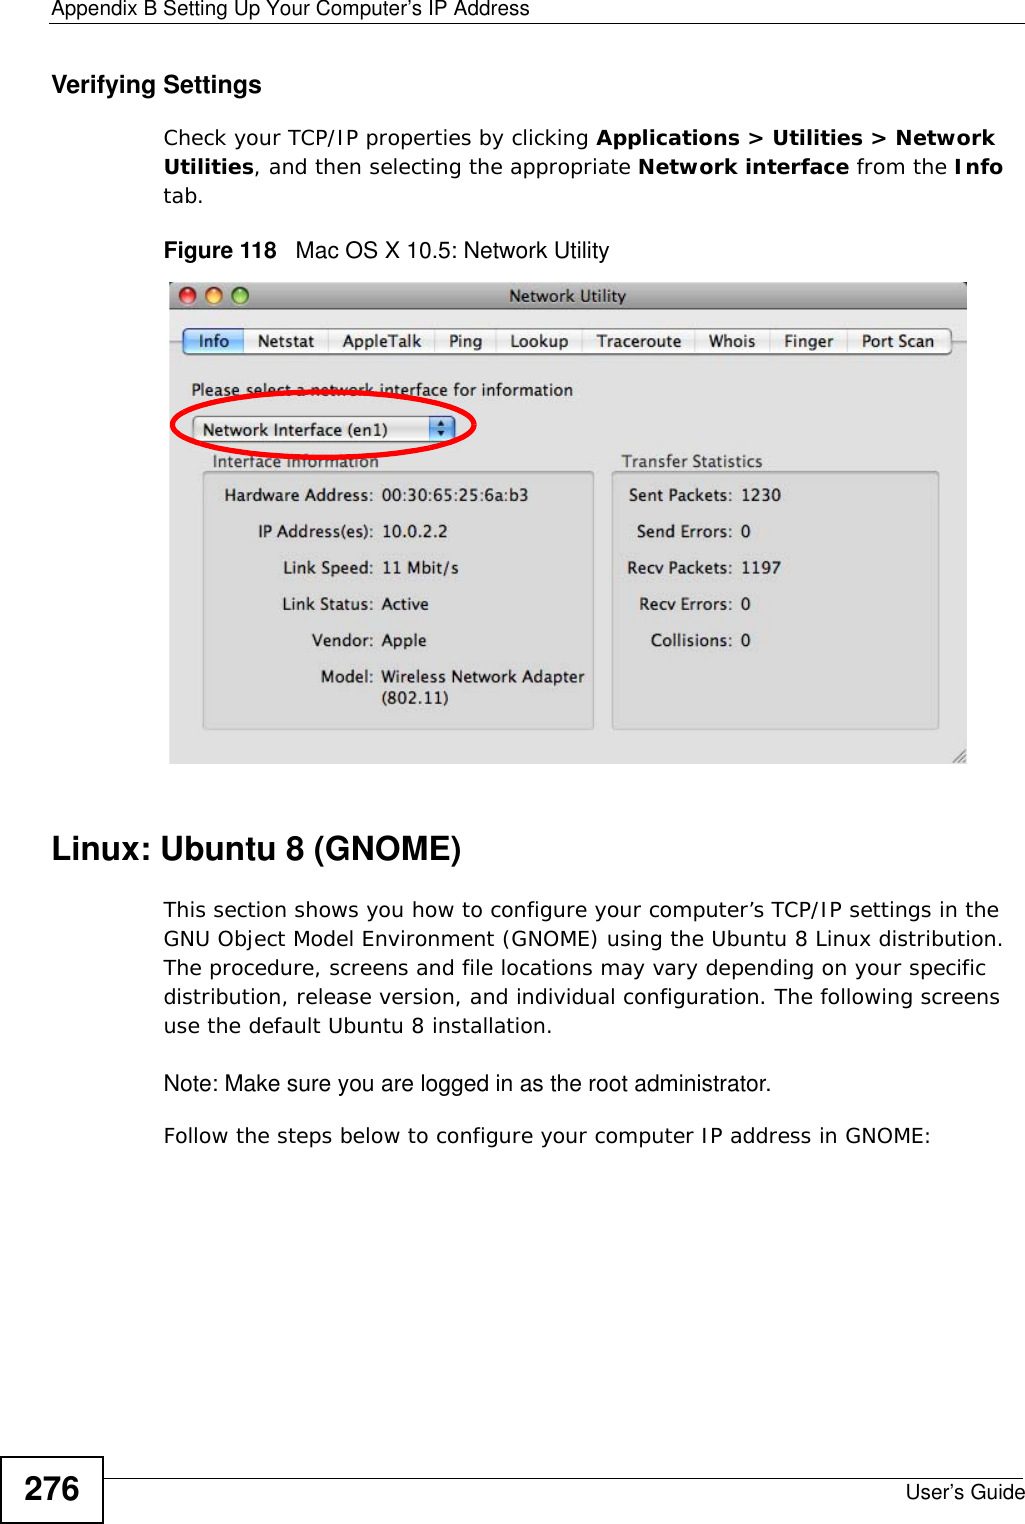 Appendix B Setting Up Your Computer’s IP AddressUser’s Guide276Verifying SettingsCheck your TCP/IP properties by clicking Applications &gt; Utilities &gt; Network Utilities, and then selecting the appropriate Network interface from the Info tab.Figure 118   Mac OS X 10.5: Network UtilityLinux: Ubuntu 8 (GNOME)This section shows you how to configure your computer’s TCP/IP settings in the GNU Object Model Environment (GNOME) using the Ubuntu 8 Linux distribution. The procedure, screens and file locations may vary depending on your specific distribution, release version, and individual configuration. The following screens use the default Ubuntu 8 installation.Note: Make sure you are logged in as the root administrator. Follow the steps below to configure your computer IP address in GNOME: 